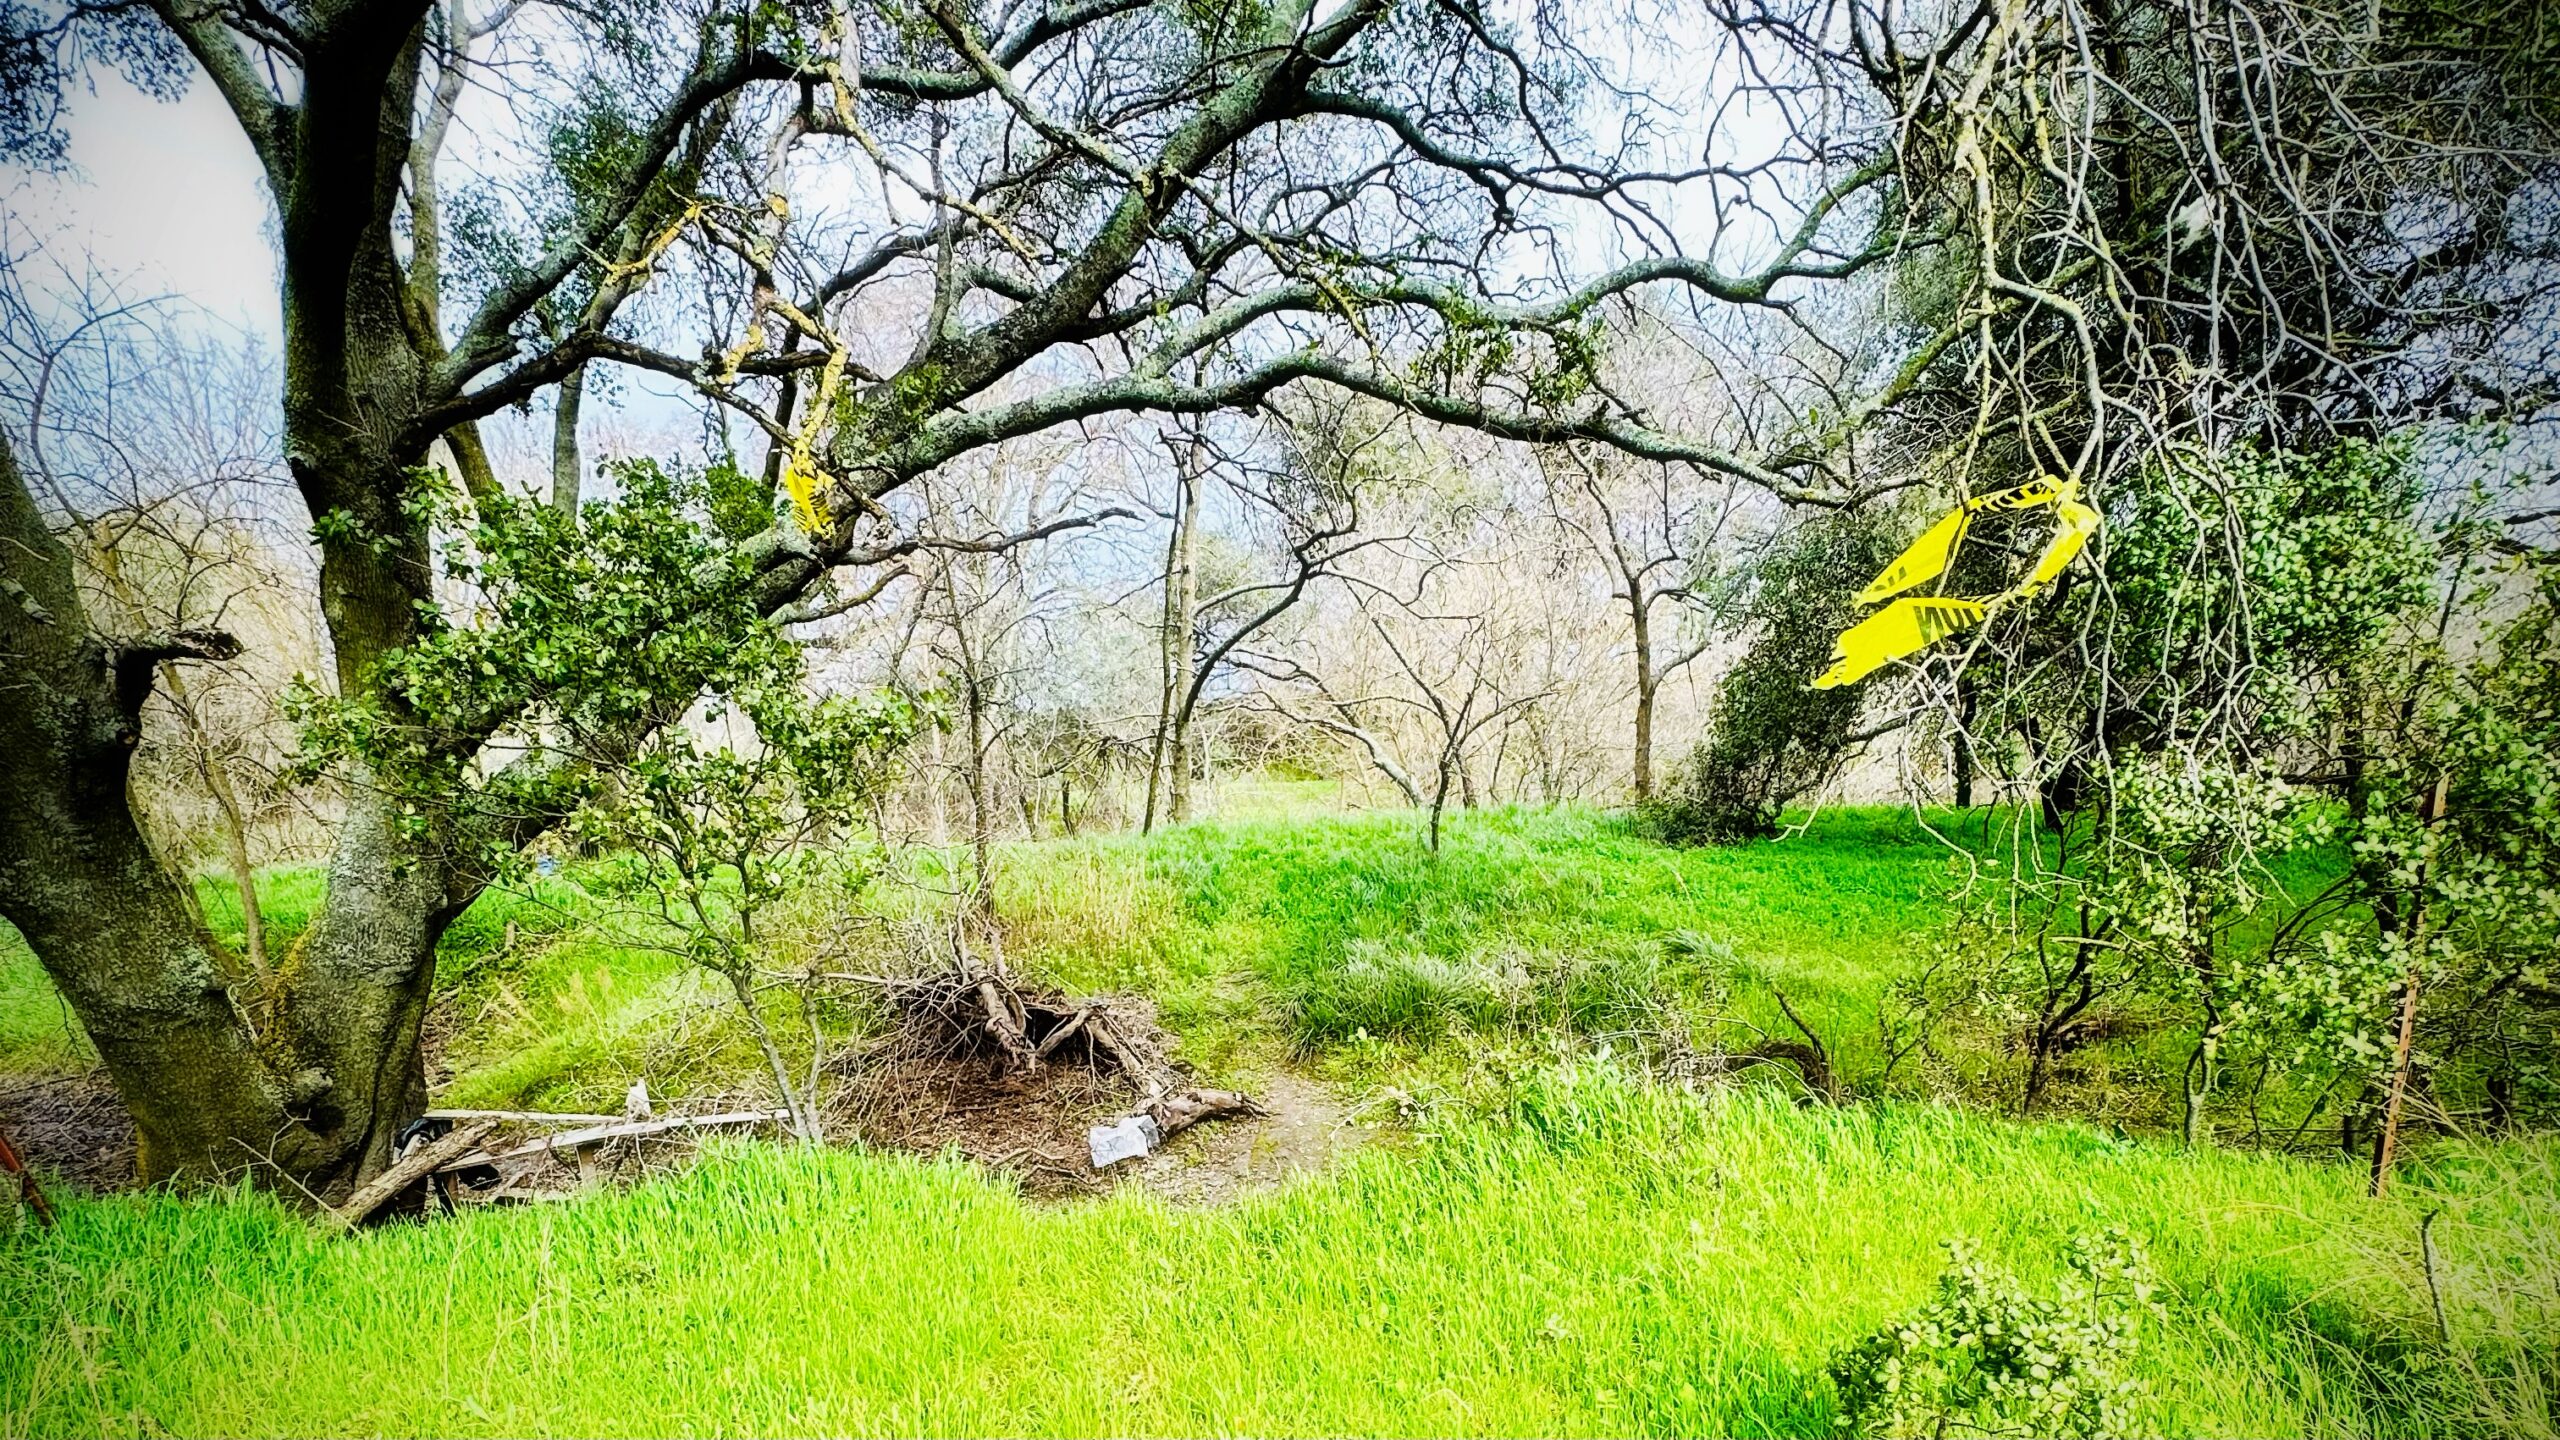 A woodland scene with green grass and a yellow piece of caution tape tied in a tree branch.